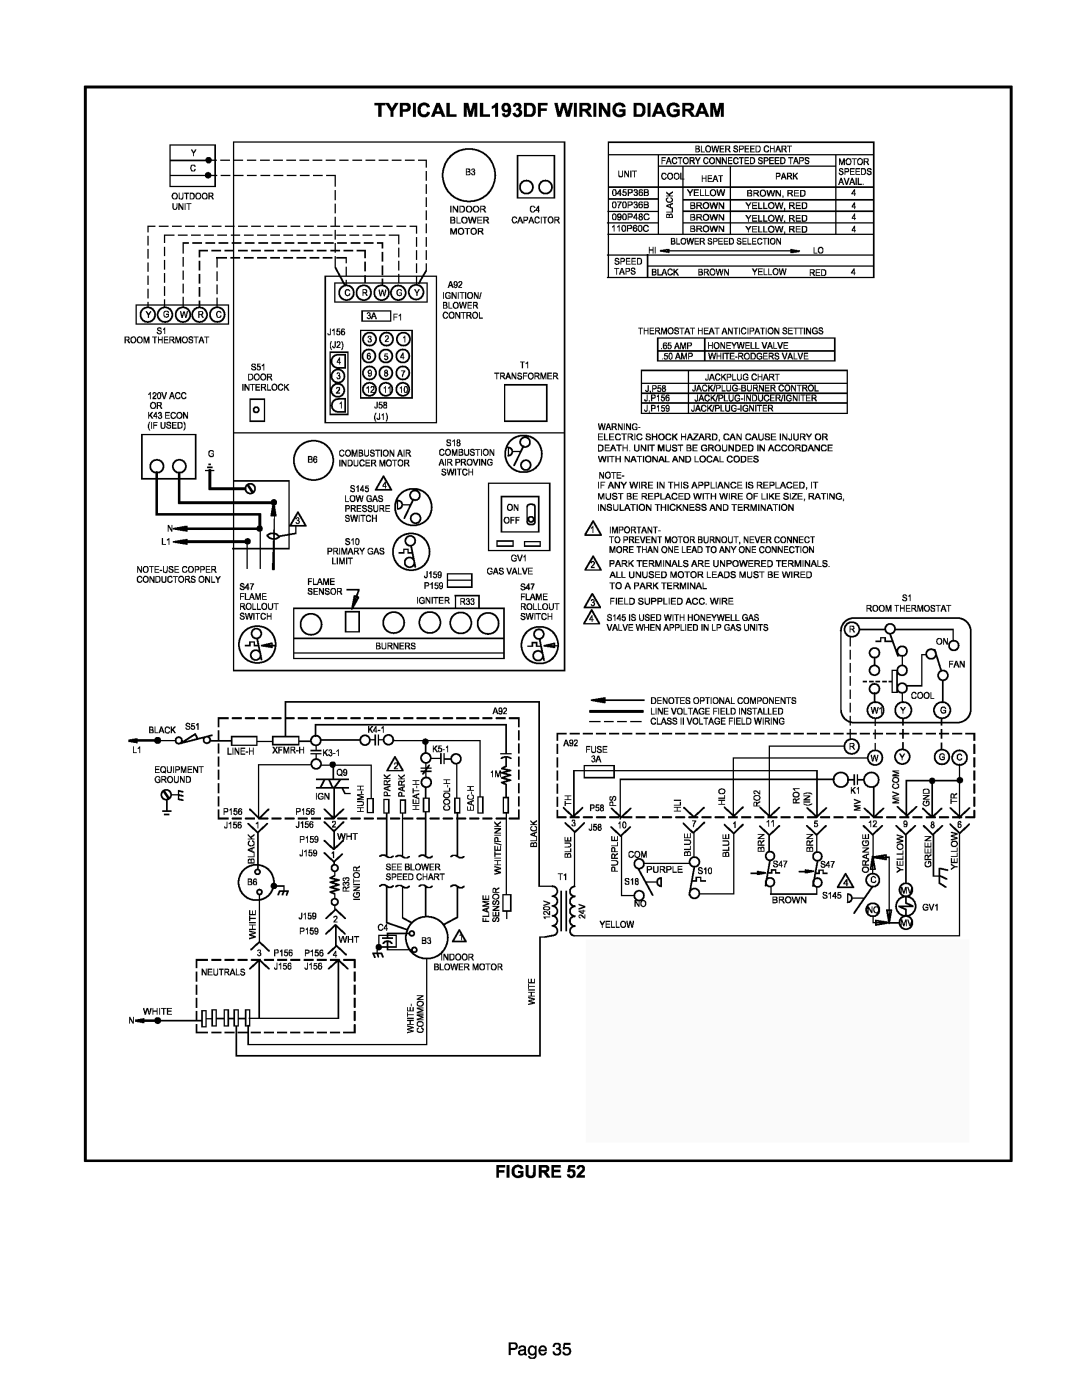 Lennox International Inc MERIT SERIES GAS FURNACE DOWNFLOW AIR DISCHARGE TYPICAL ML193DF WIRING DIAGRAM, FIGURE Page 